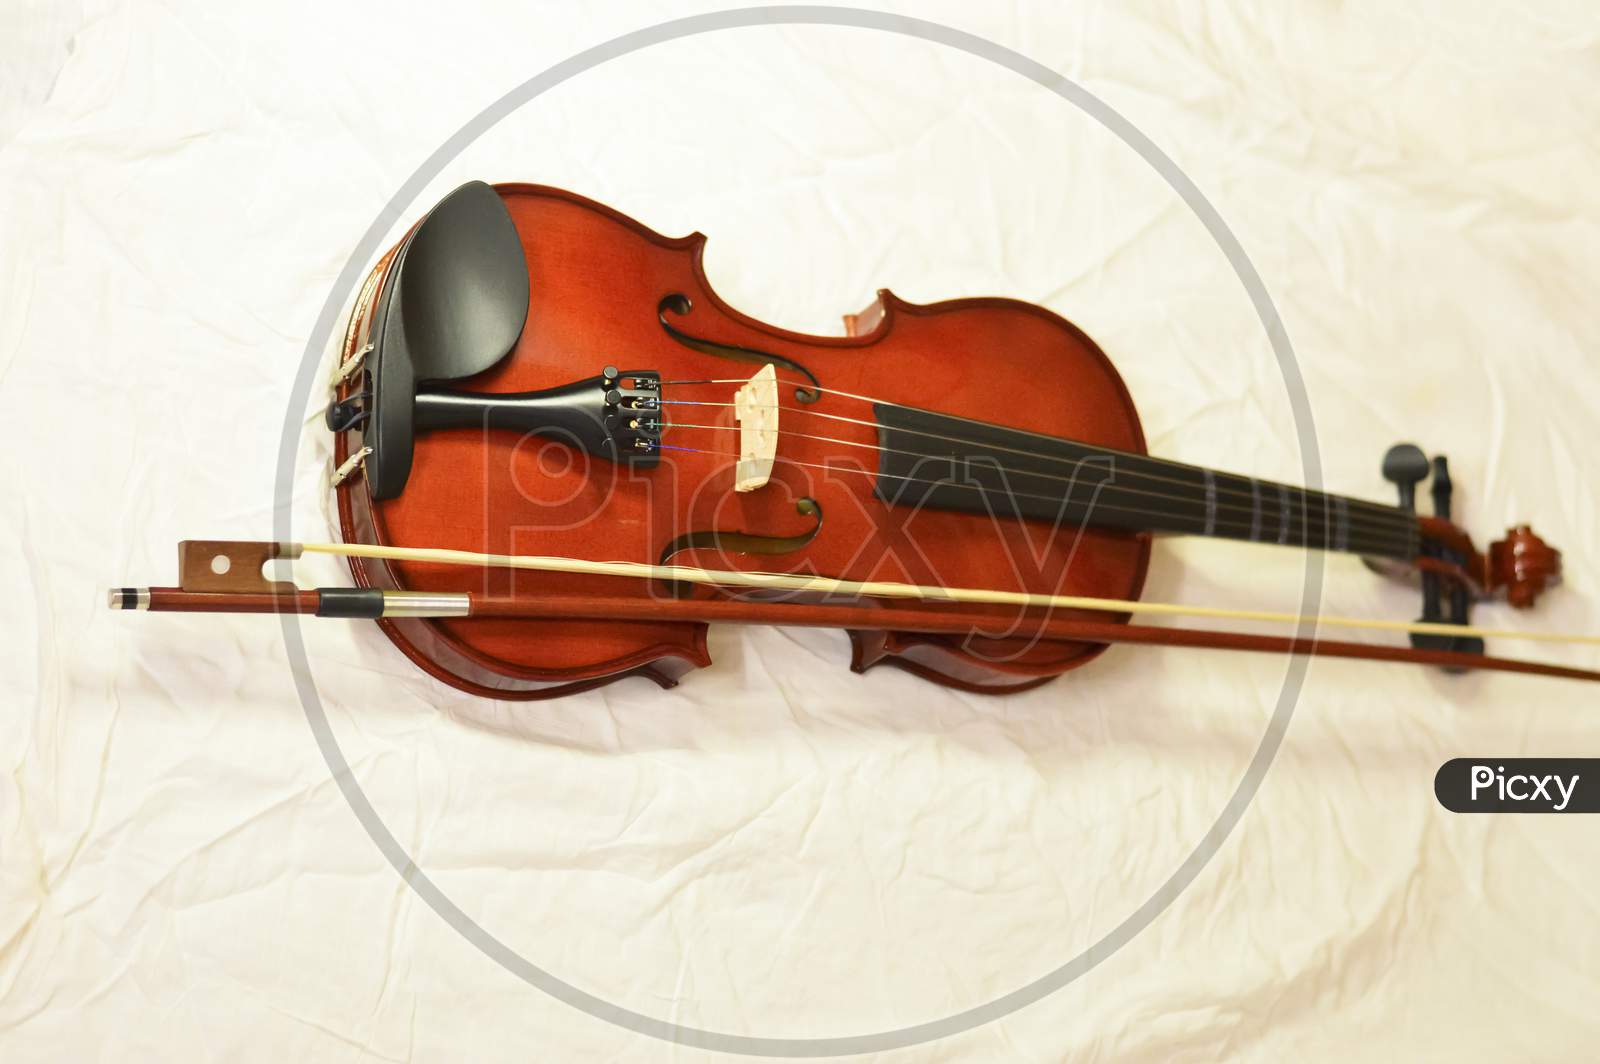 Close Up Shot Of A Violin,On White Background . Blur Photo